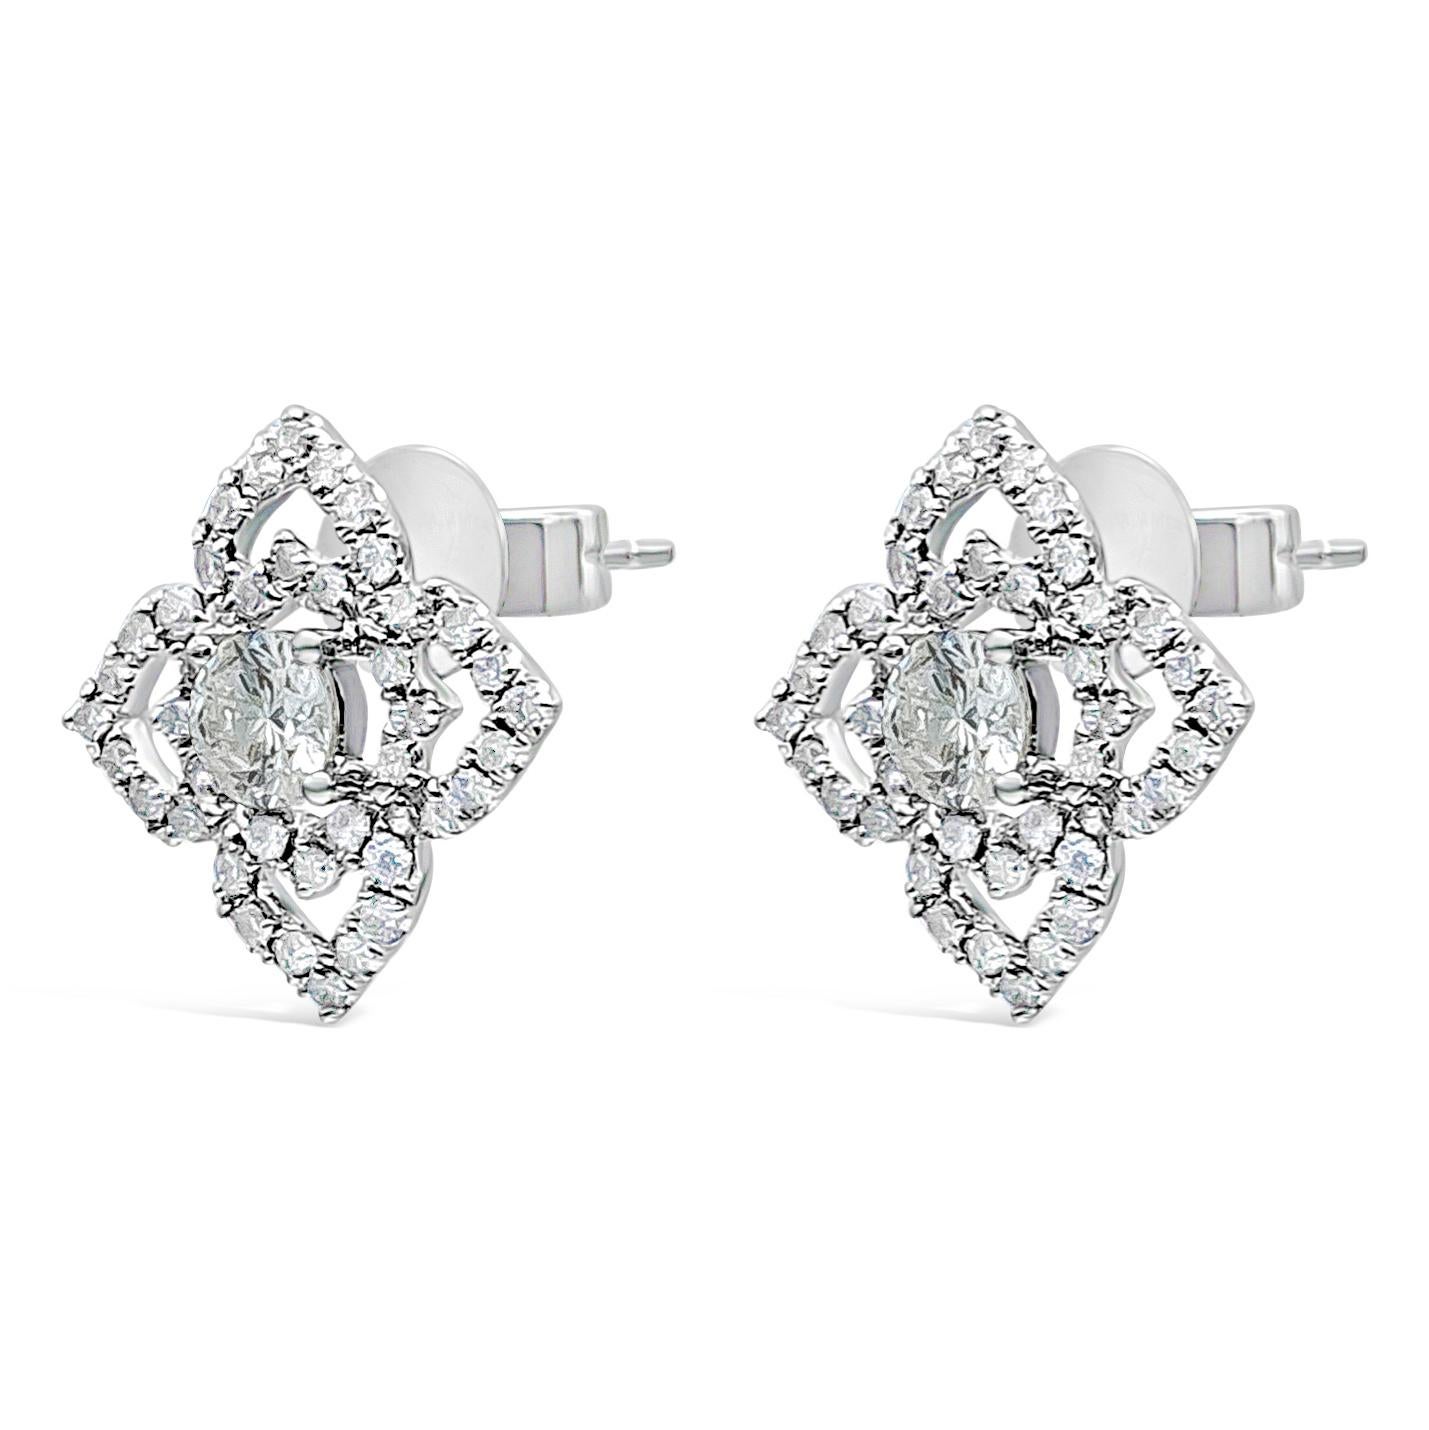 A chic and versatile stud earrings featuring 0.26 carat total brilliant round cut diamond, F color, VS-SI in clarity in the center. Surrounded by 80 pieces of sparkling round cut diamond in an intricate open-heart floral motif design weighing 0.30